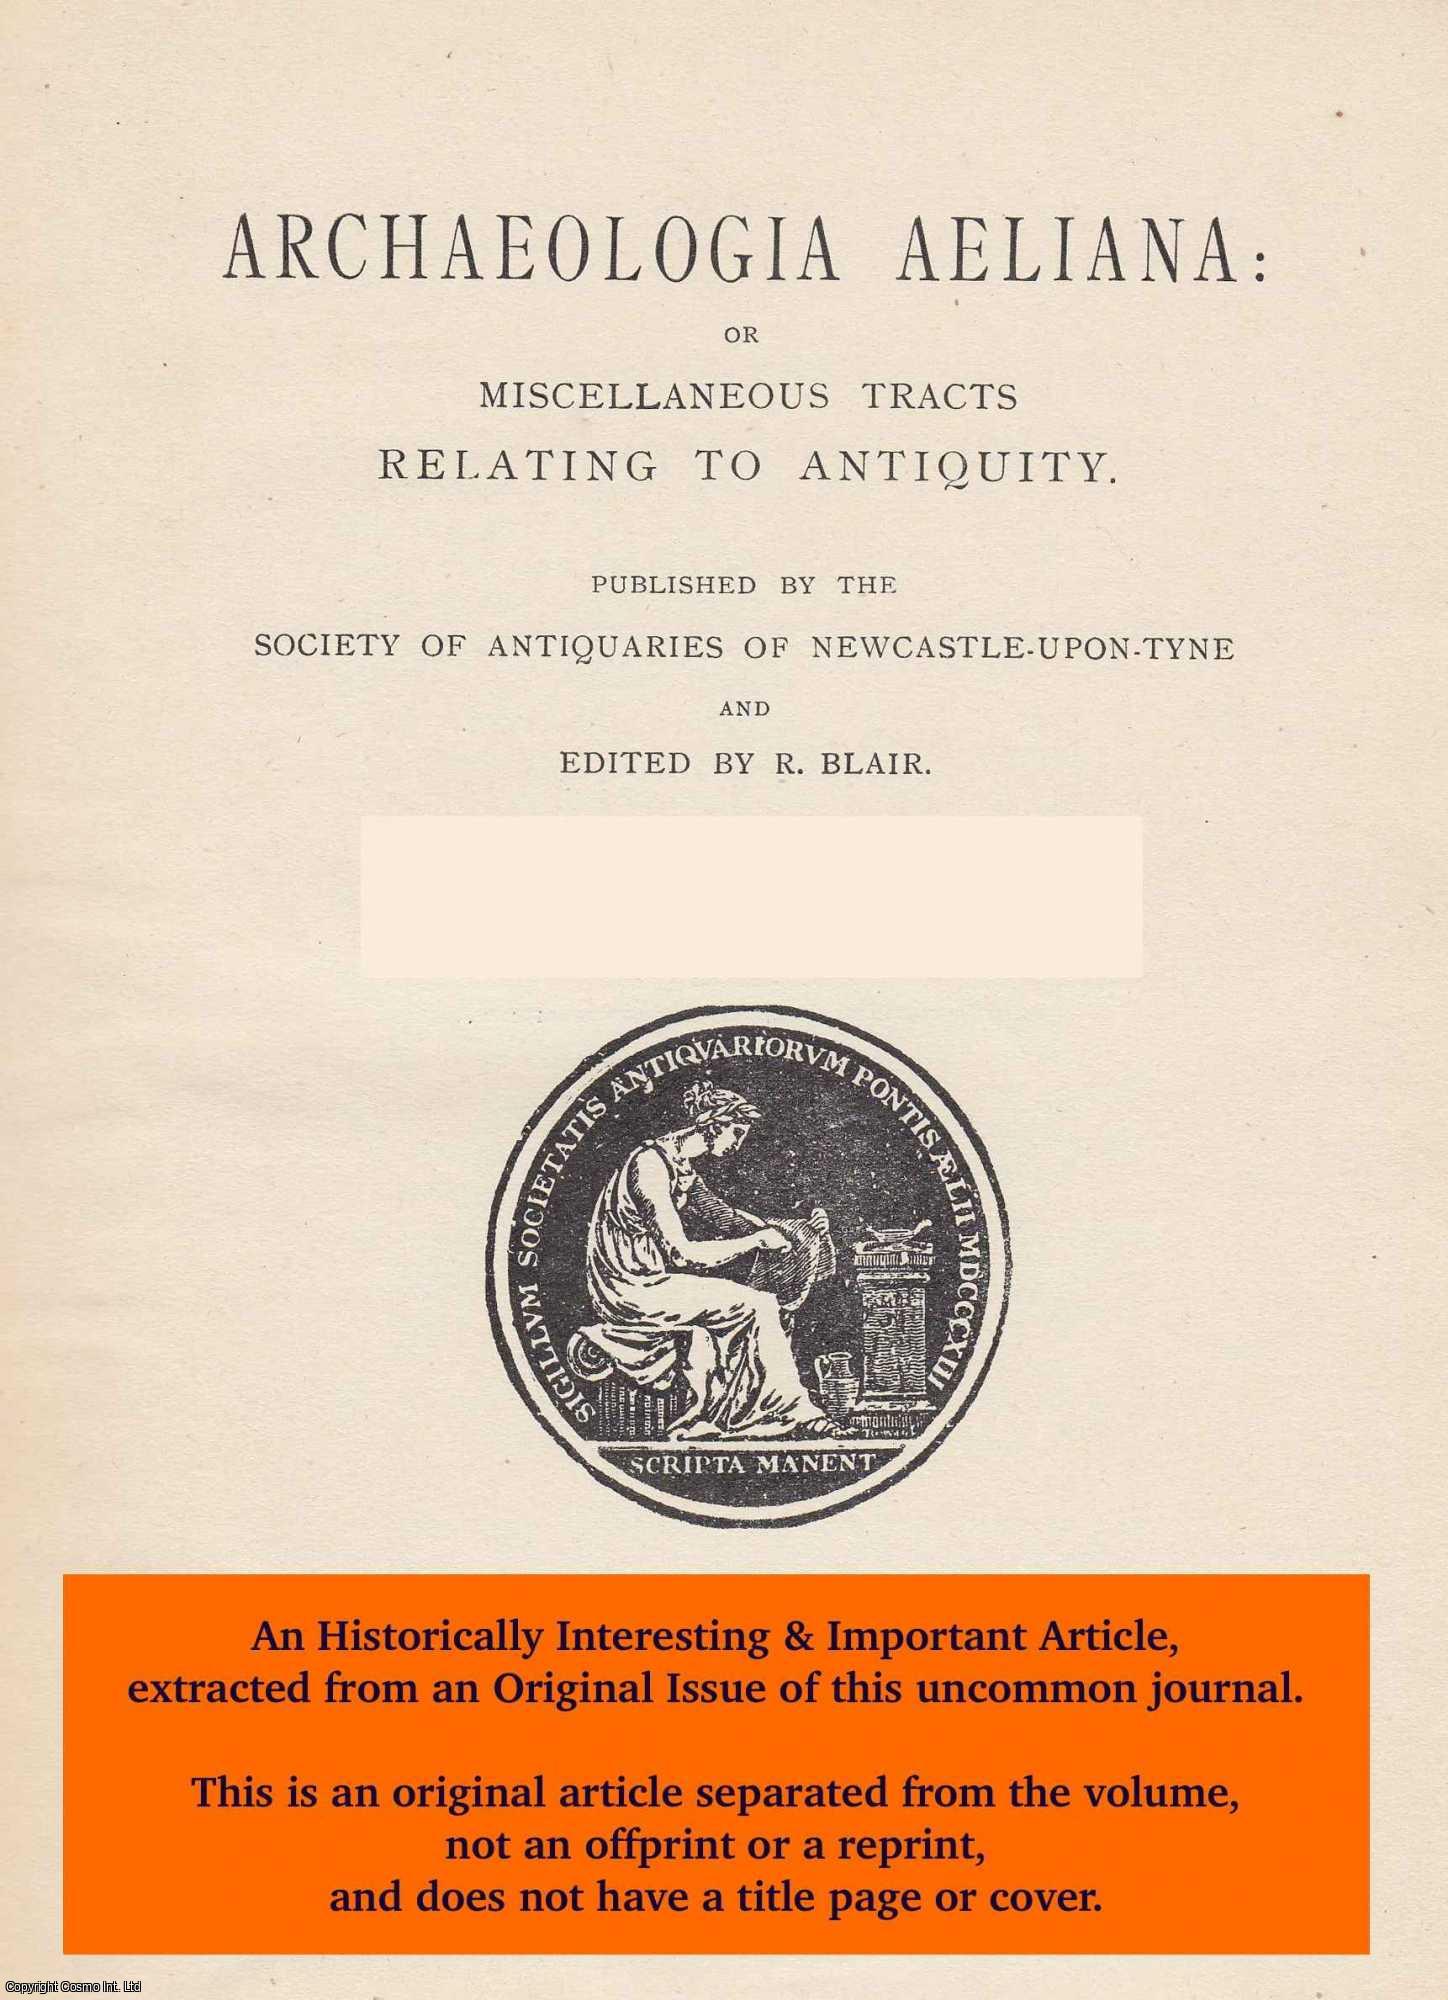 Julius P. Gilson, Julius P. - St. Julian The Harbinger, and The First of The English Percys. An original article from The Archaeologia Aeliana: or Miscellaneous Tracts Relating to Antiquity, 1908.